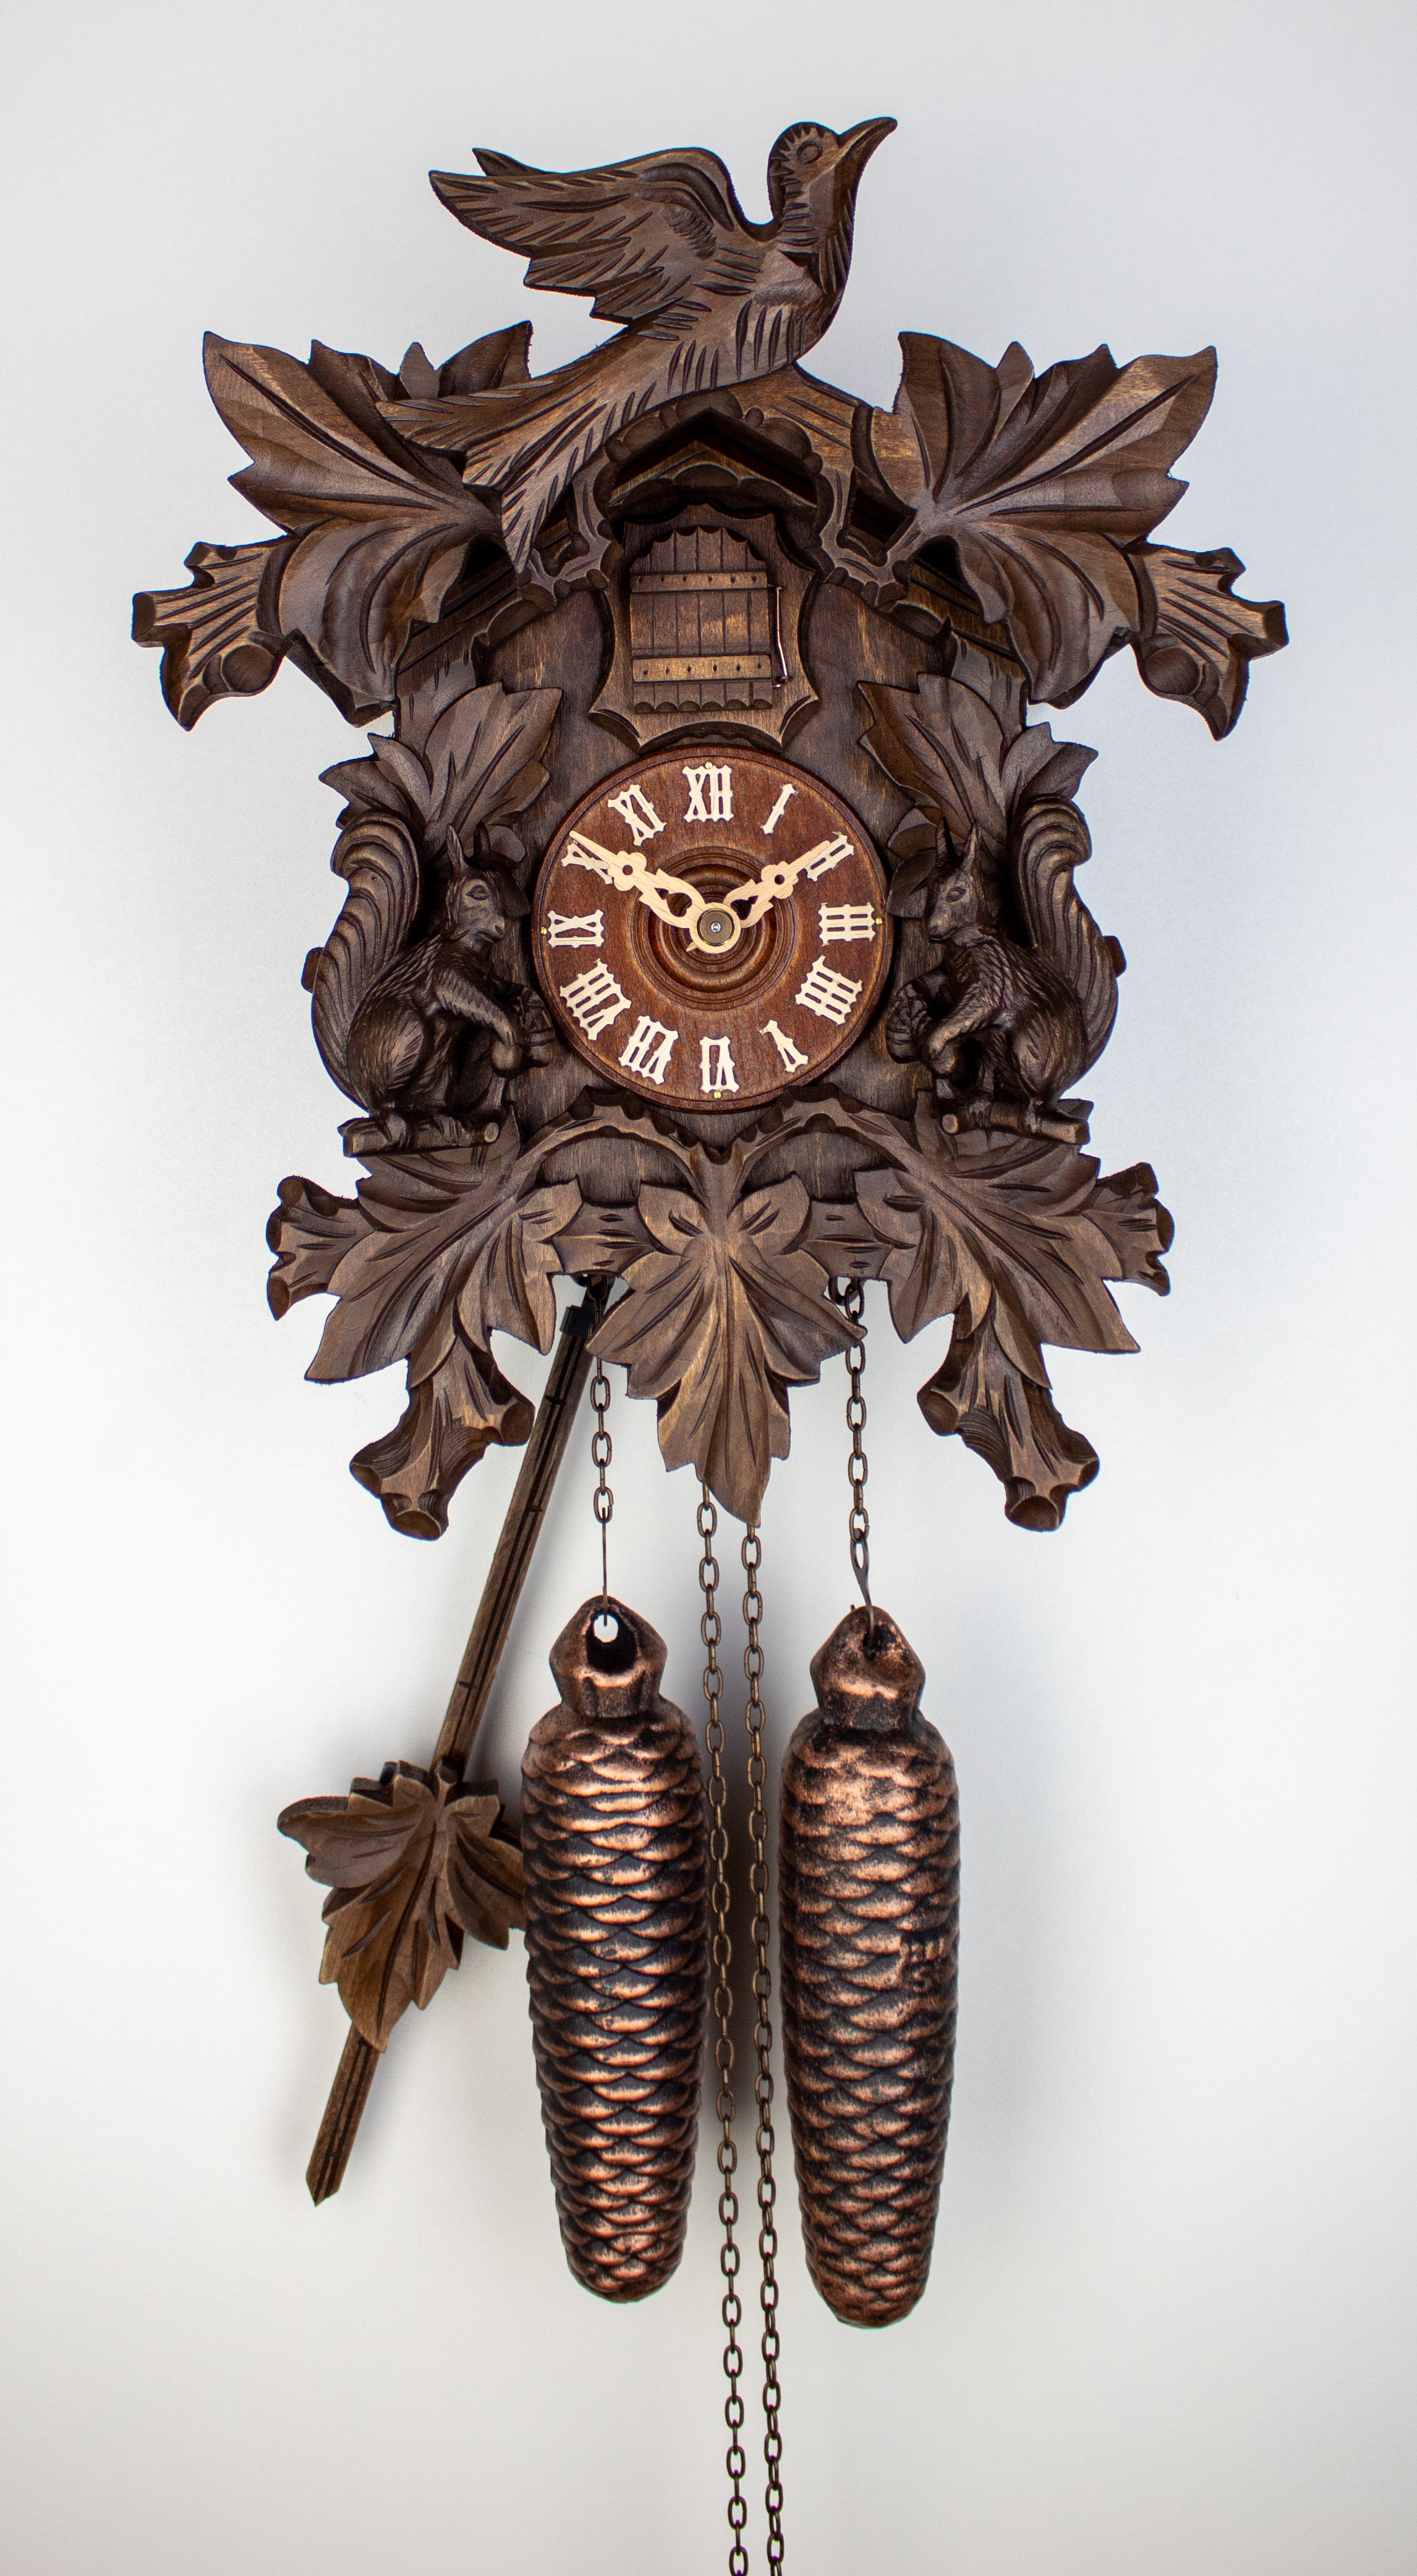 8 Days Cuckoo Clock with squirrel pair and vine leaves and bird